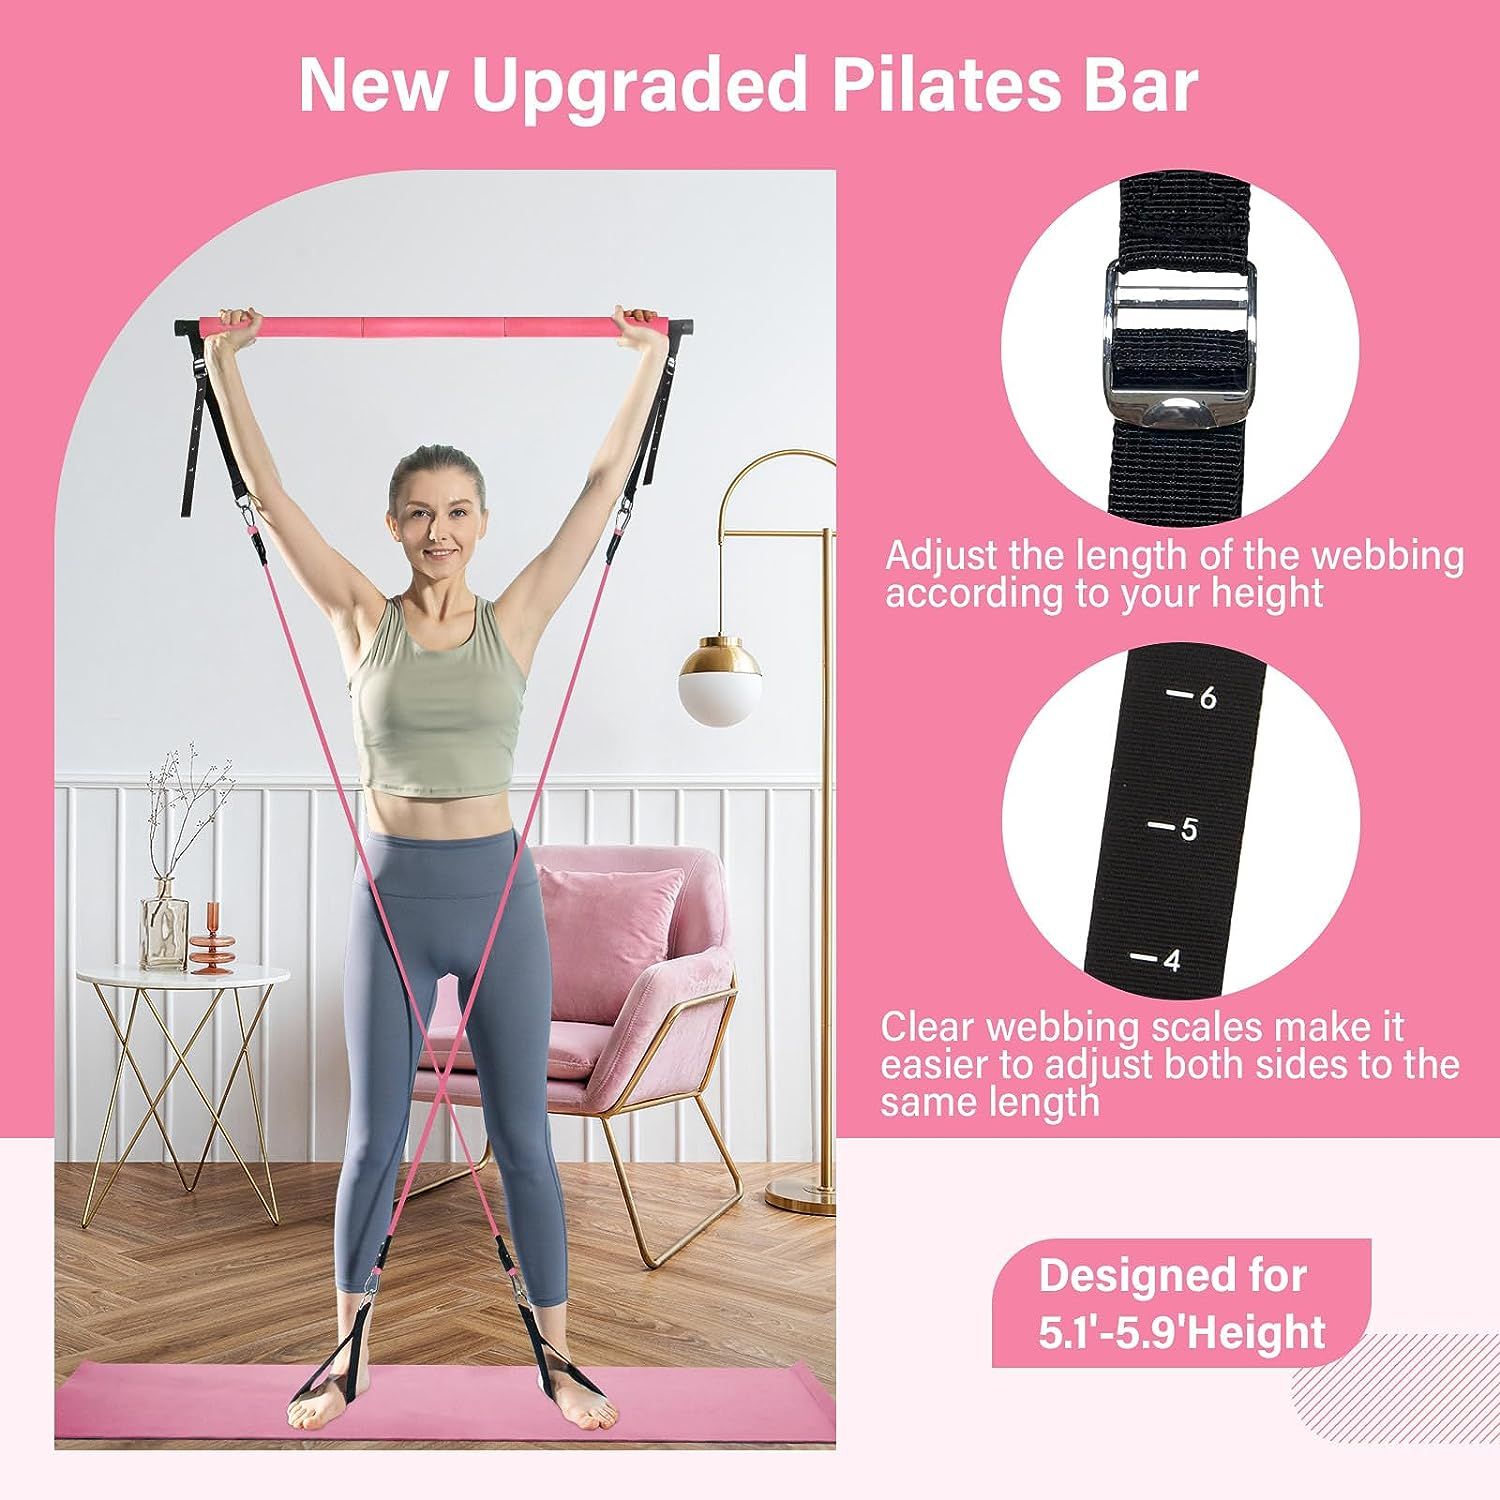 Pilates Bar Kit with Resistance Bands (30, 40 Lbs) - Portable 3 Section  Stick with Adjustable Length Bands - Multifunctional Fitness Equipment for